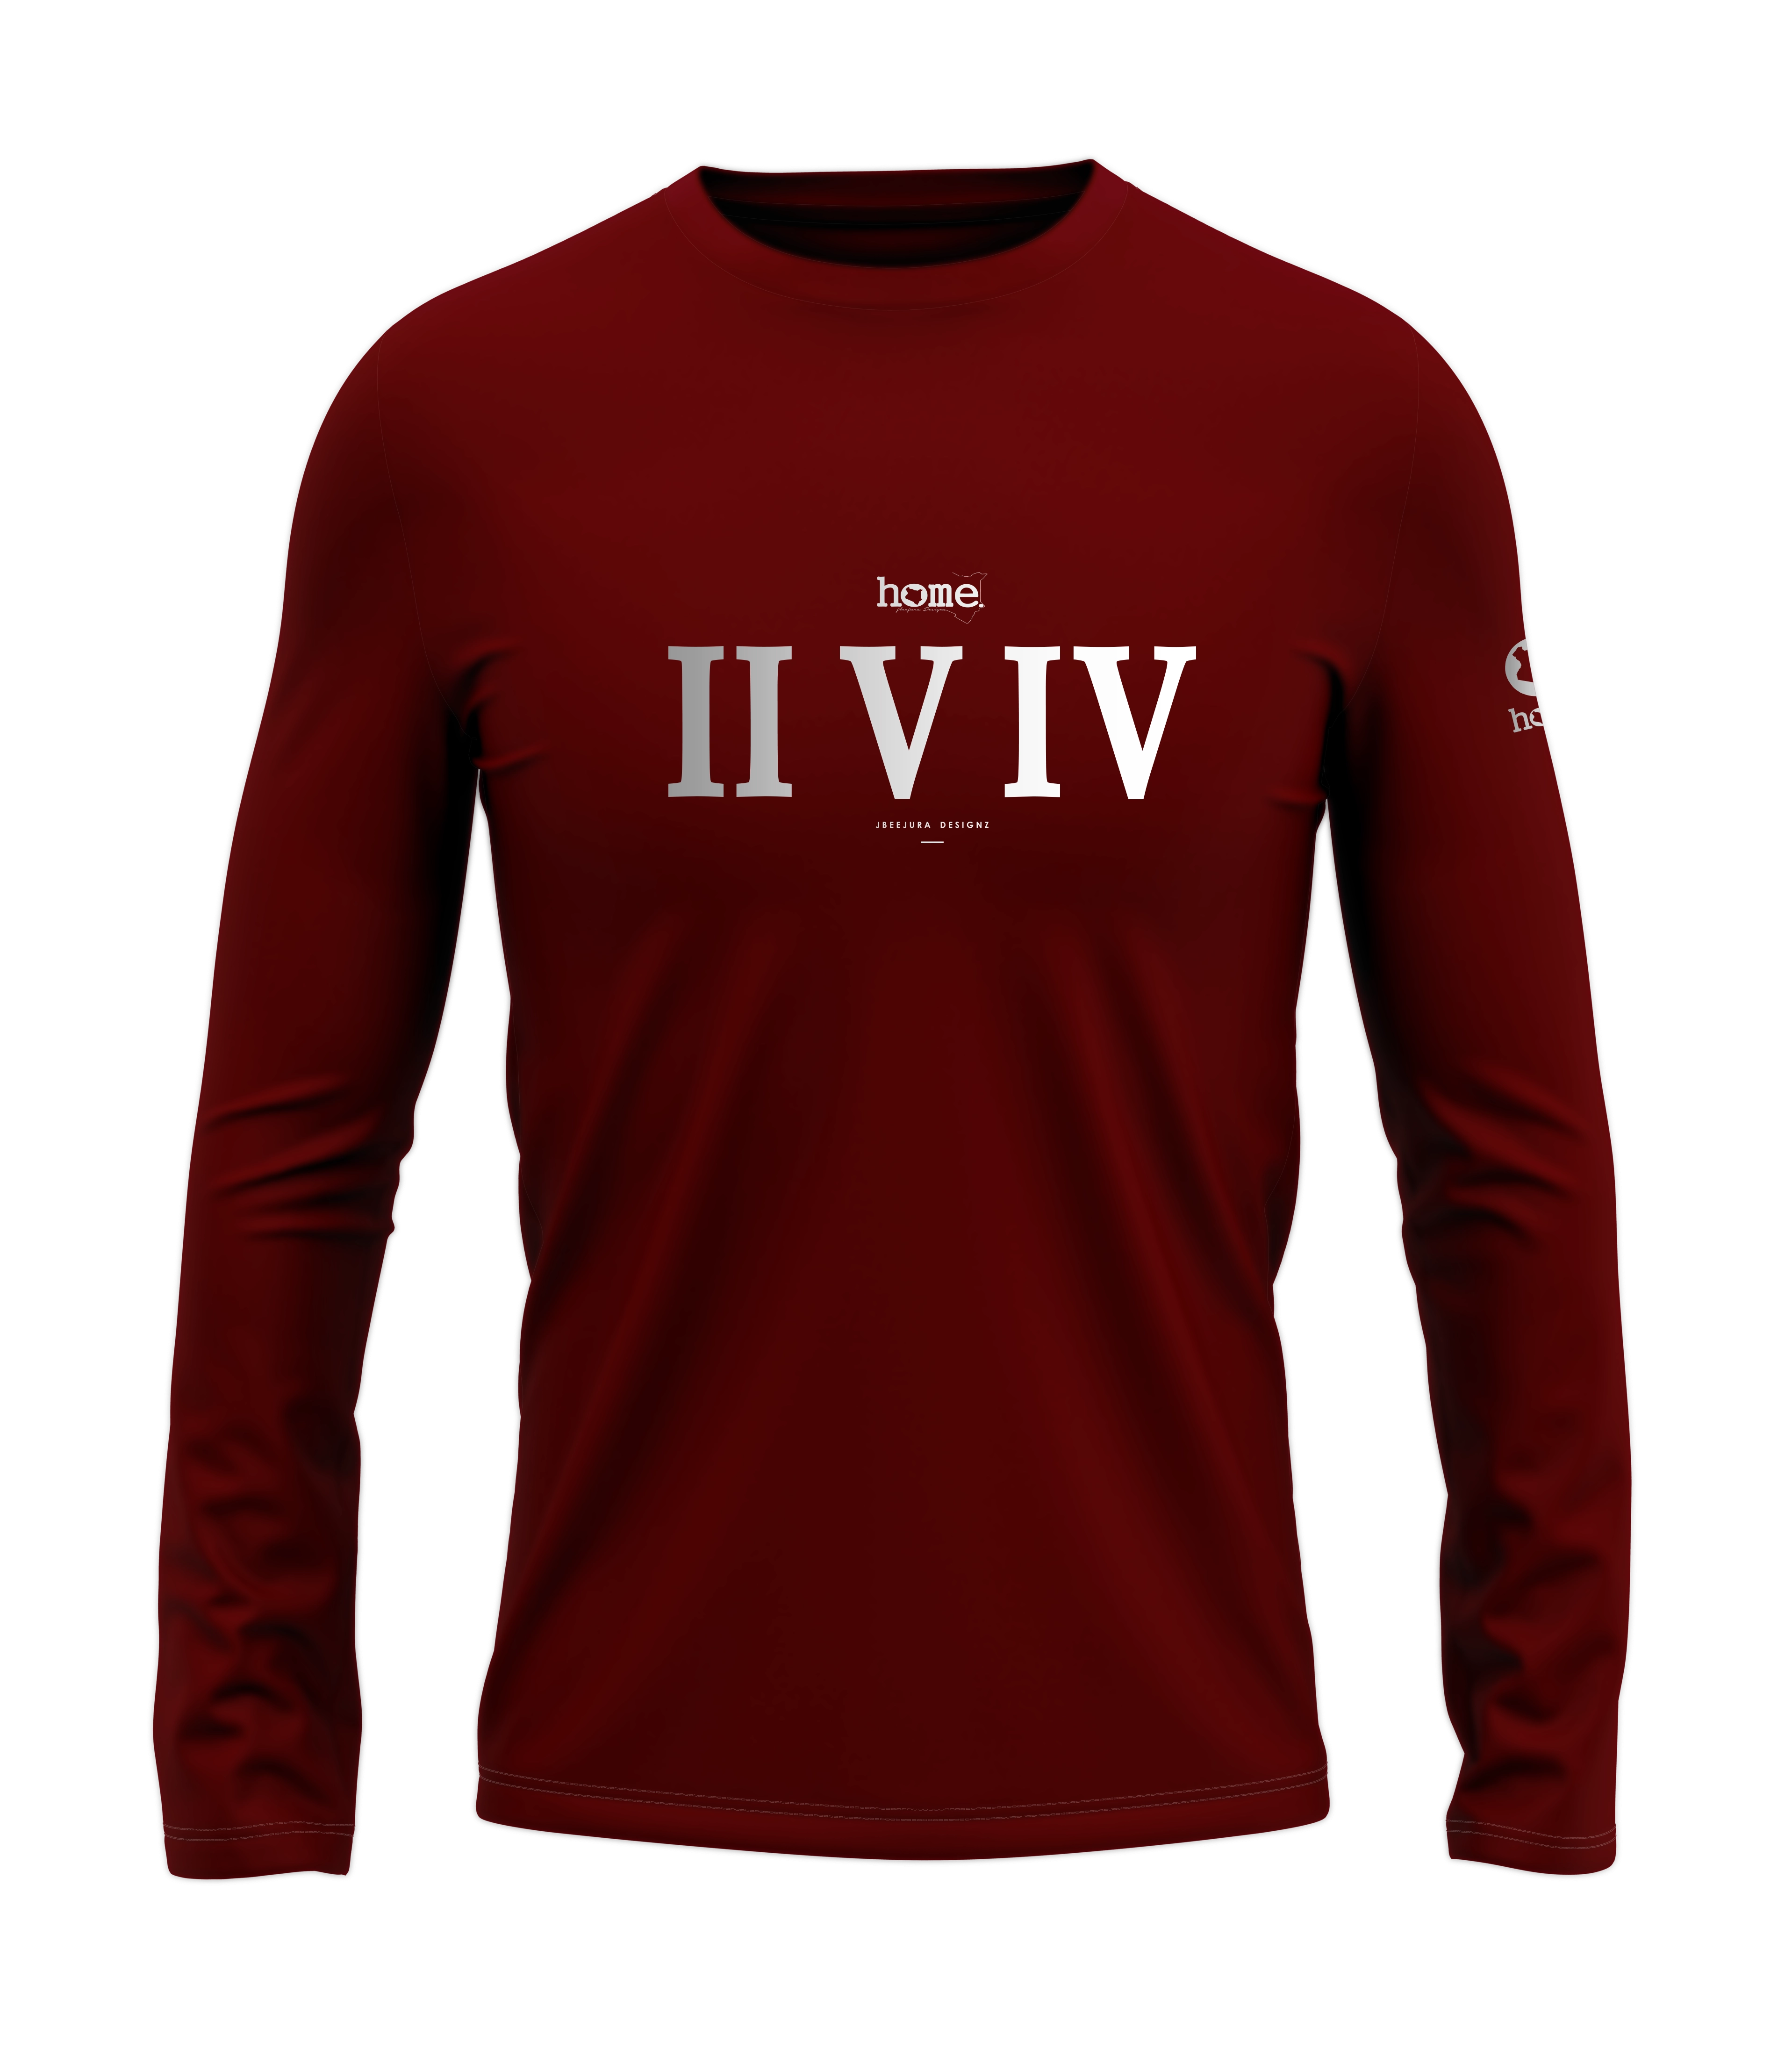 home_254 LONG-SLEEVED MAROON RED T-SHIRT WITH A SILVER ROMAN NUMERALS PRINT – COTTON PLUS FABRIC